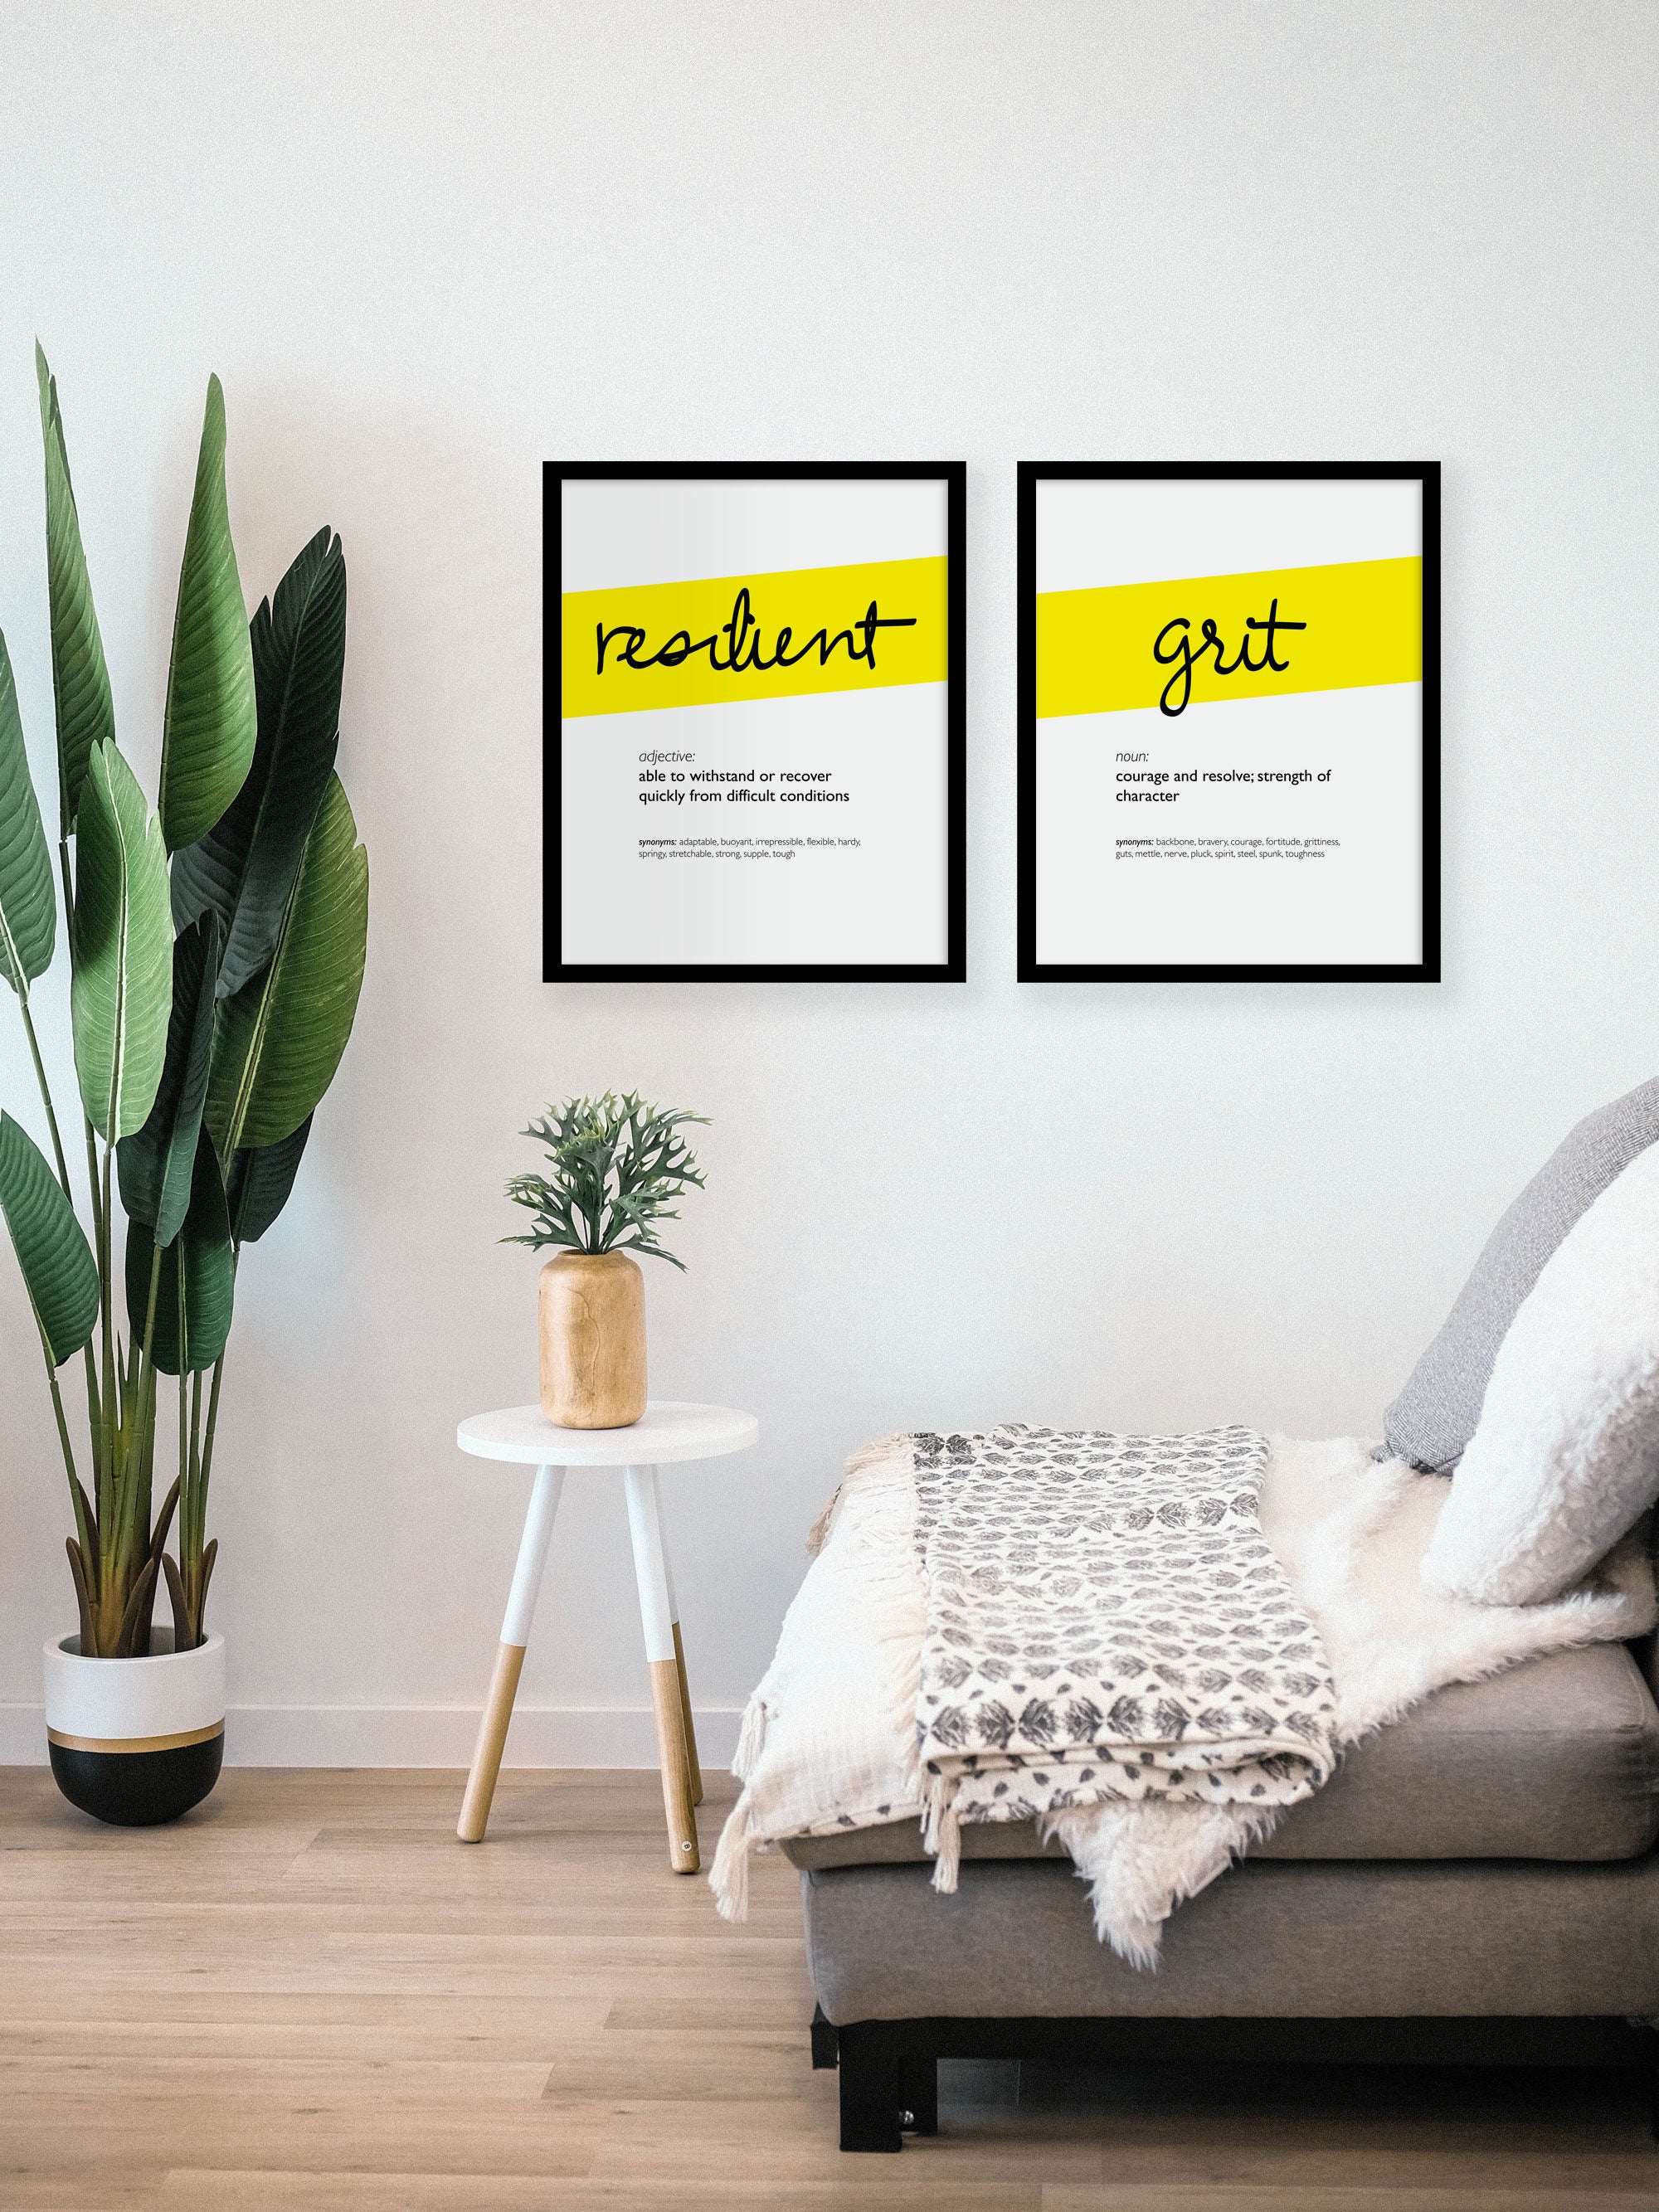 Framed Yellow Grit Print With Word Definition - High Quality, Affordable, Hand Written, Empowering, Self Love, Mantra Word Print. Archival-Quality, Matte Giclée Print - Brevity Jewelry